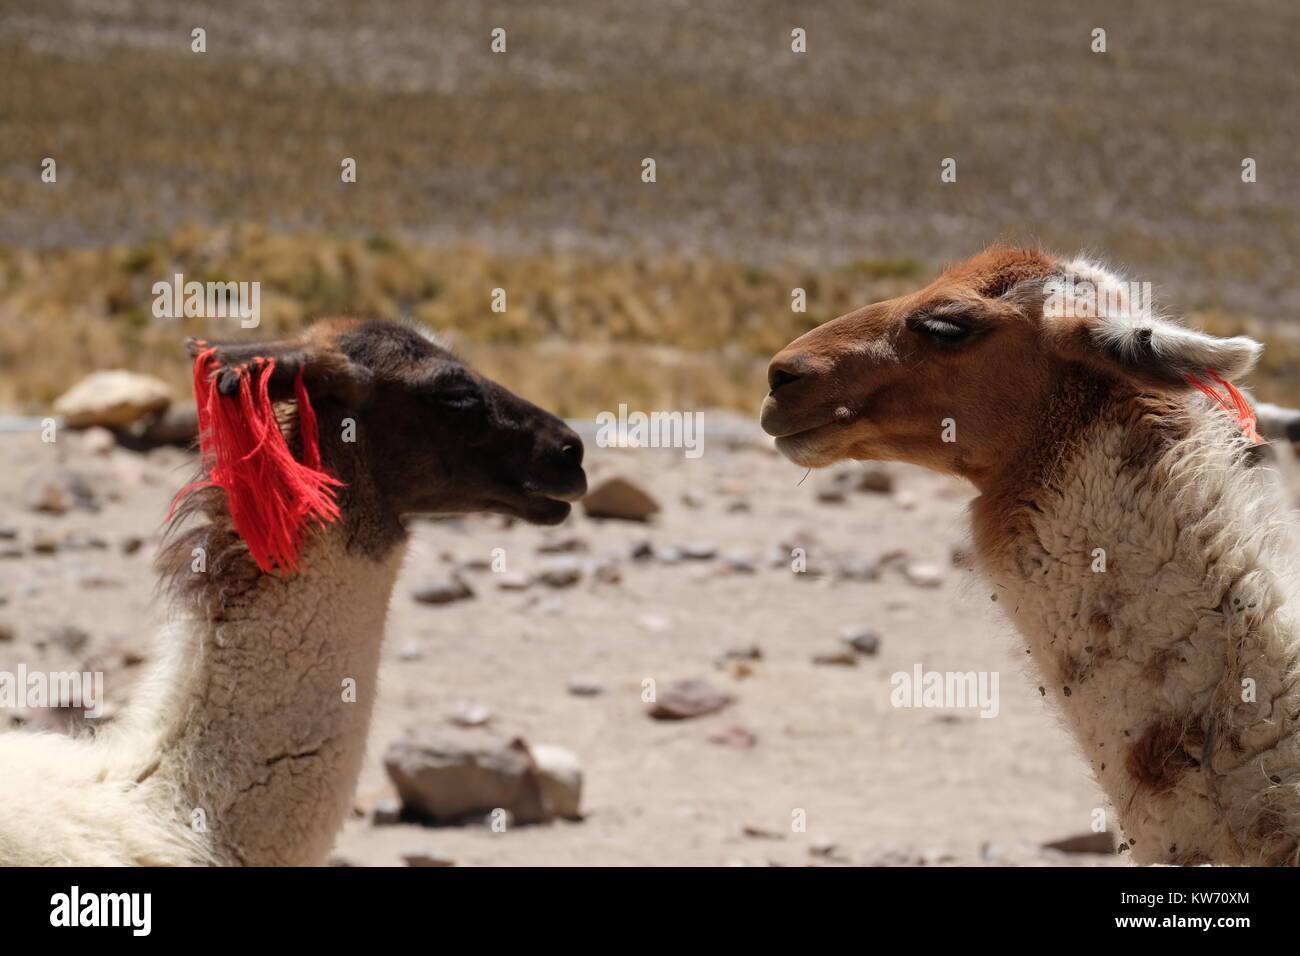 Close up of the faces of two lamas in Peru Stock Photo